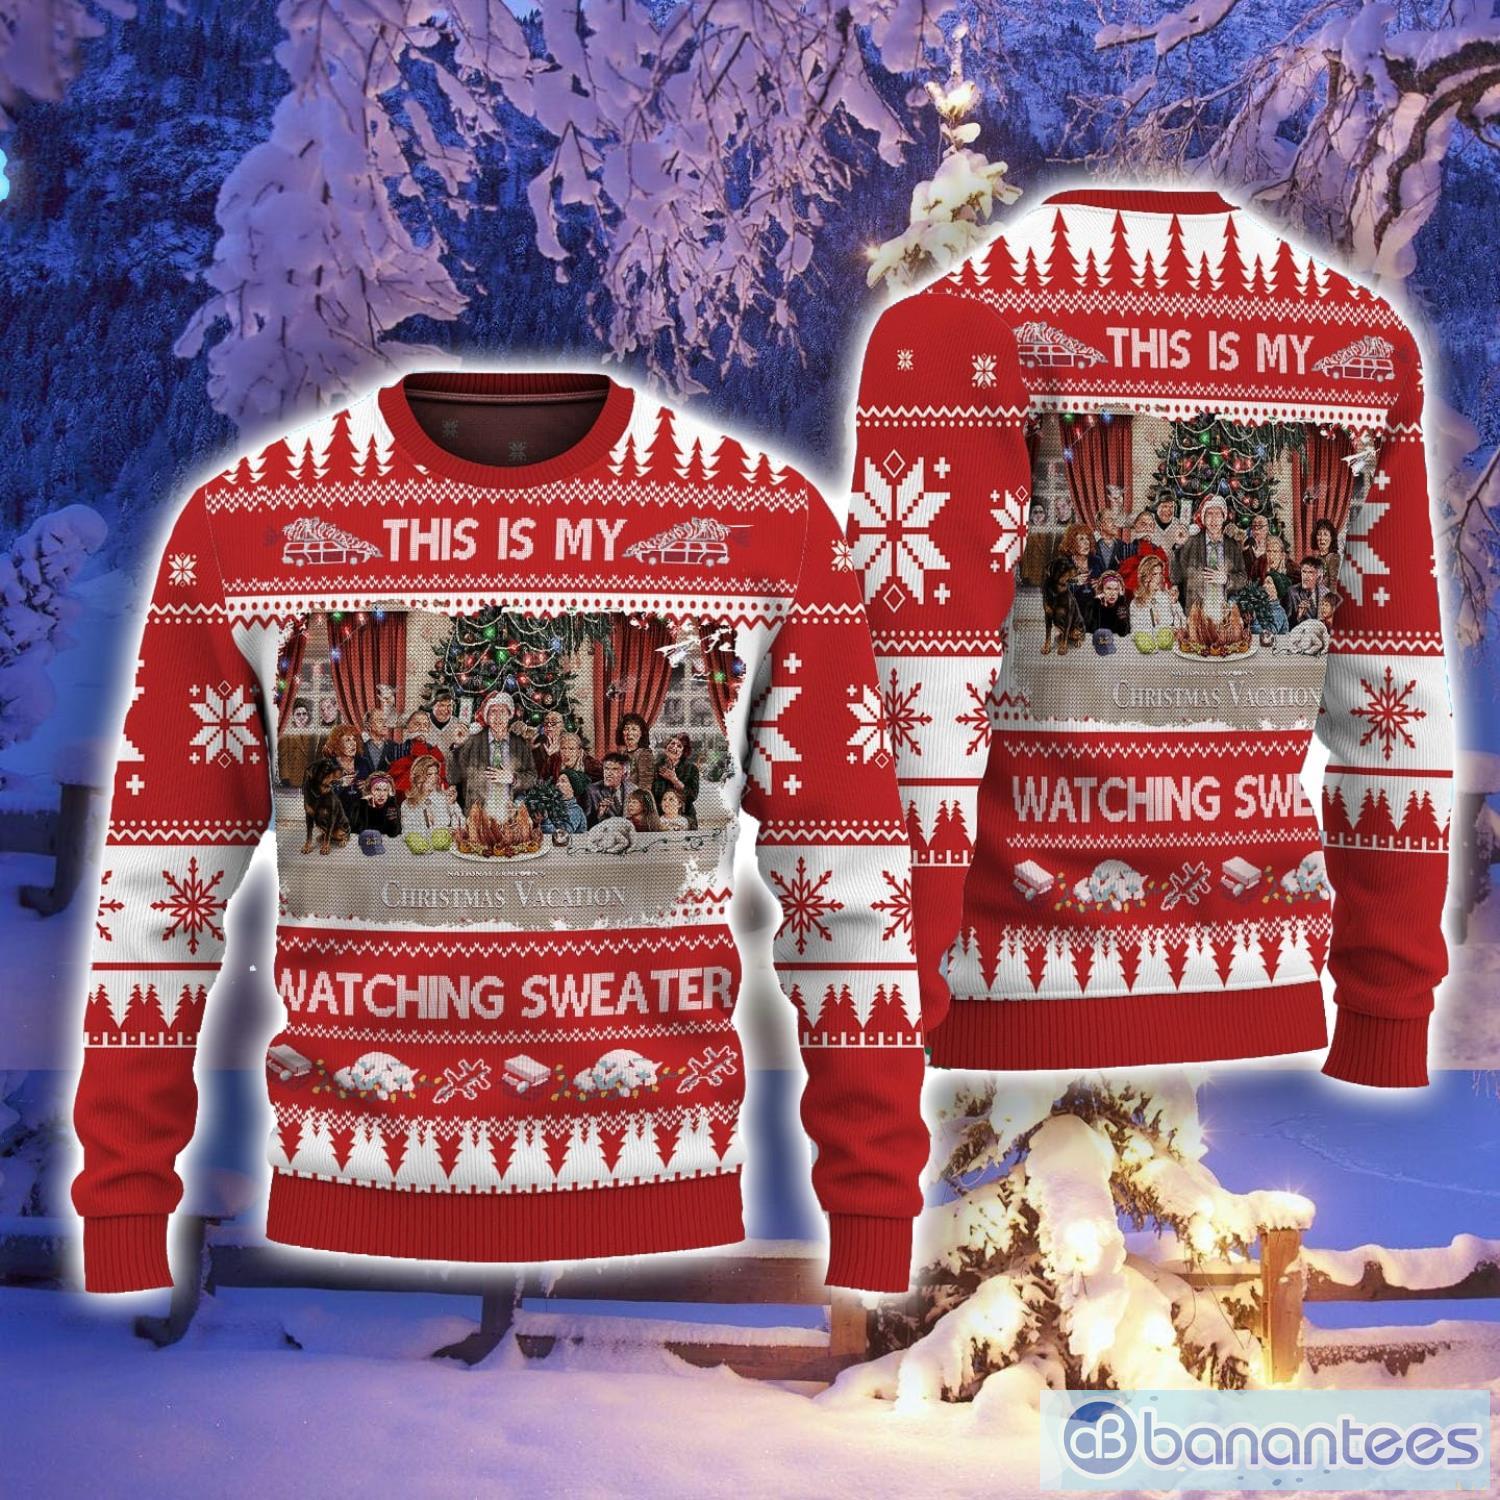 New Kids on the Block Band 3D All Over Printed Ugly Christmas Sweater  Christmas Gift For Family - Freedomdesign